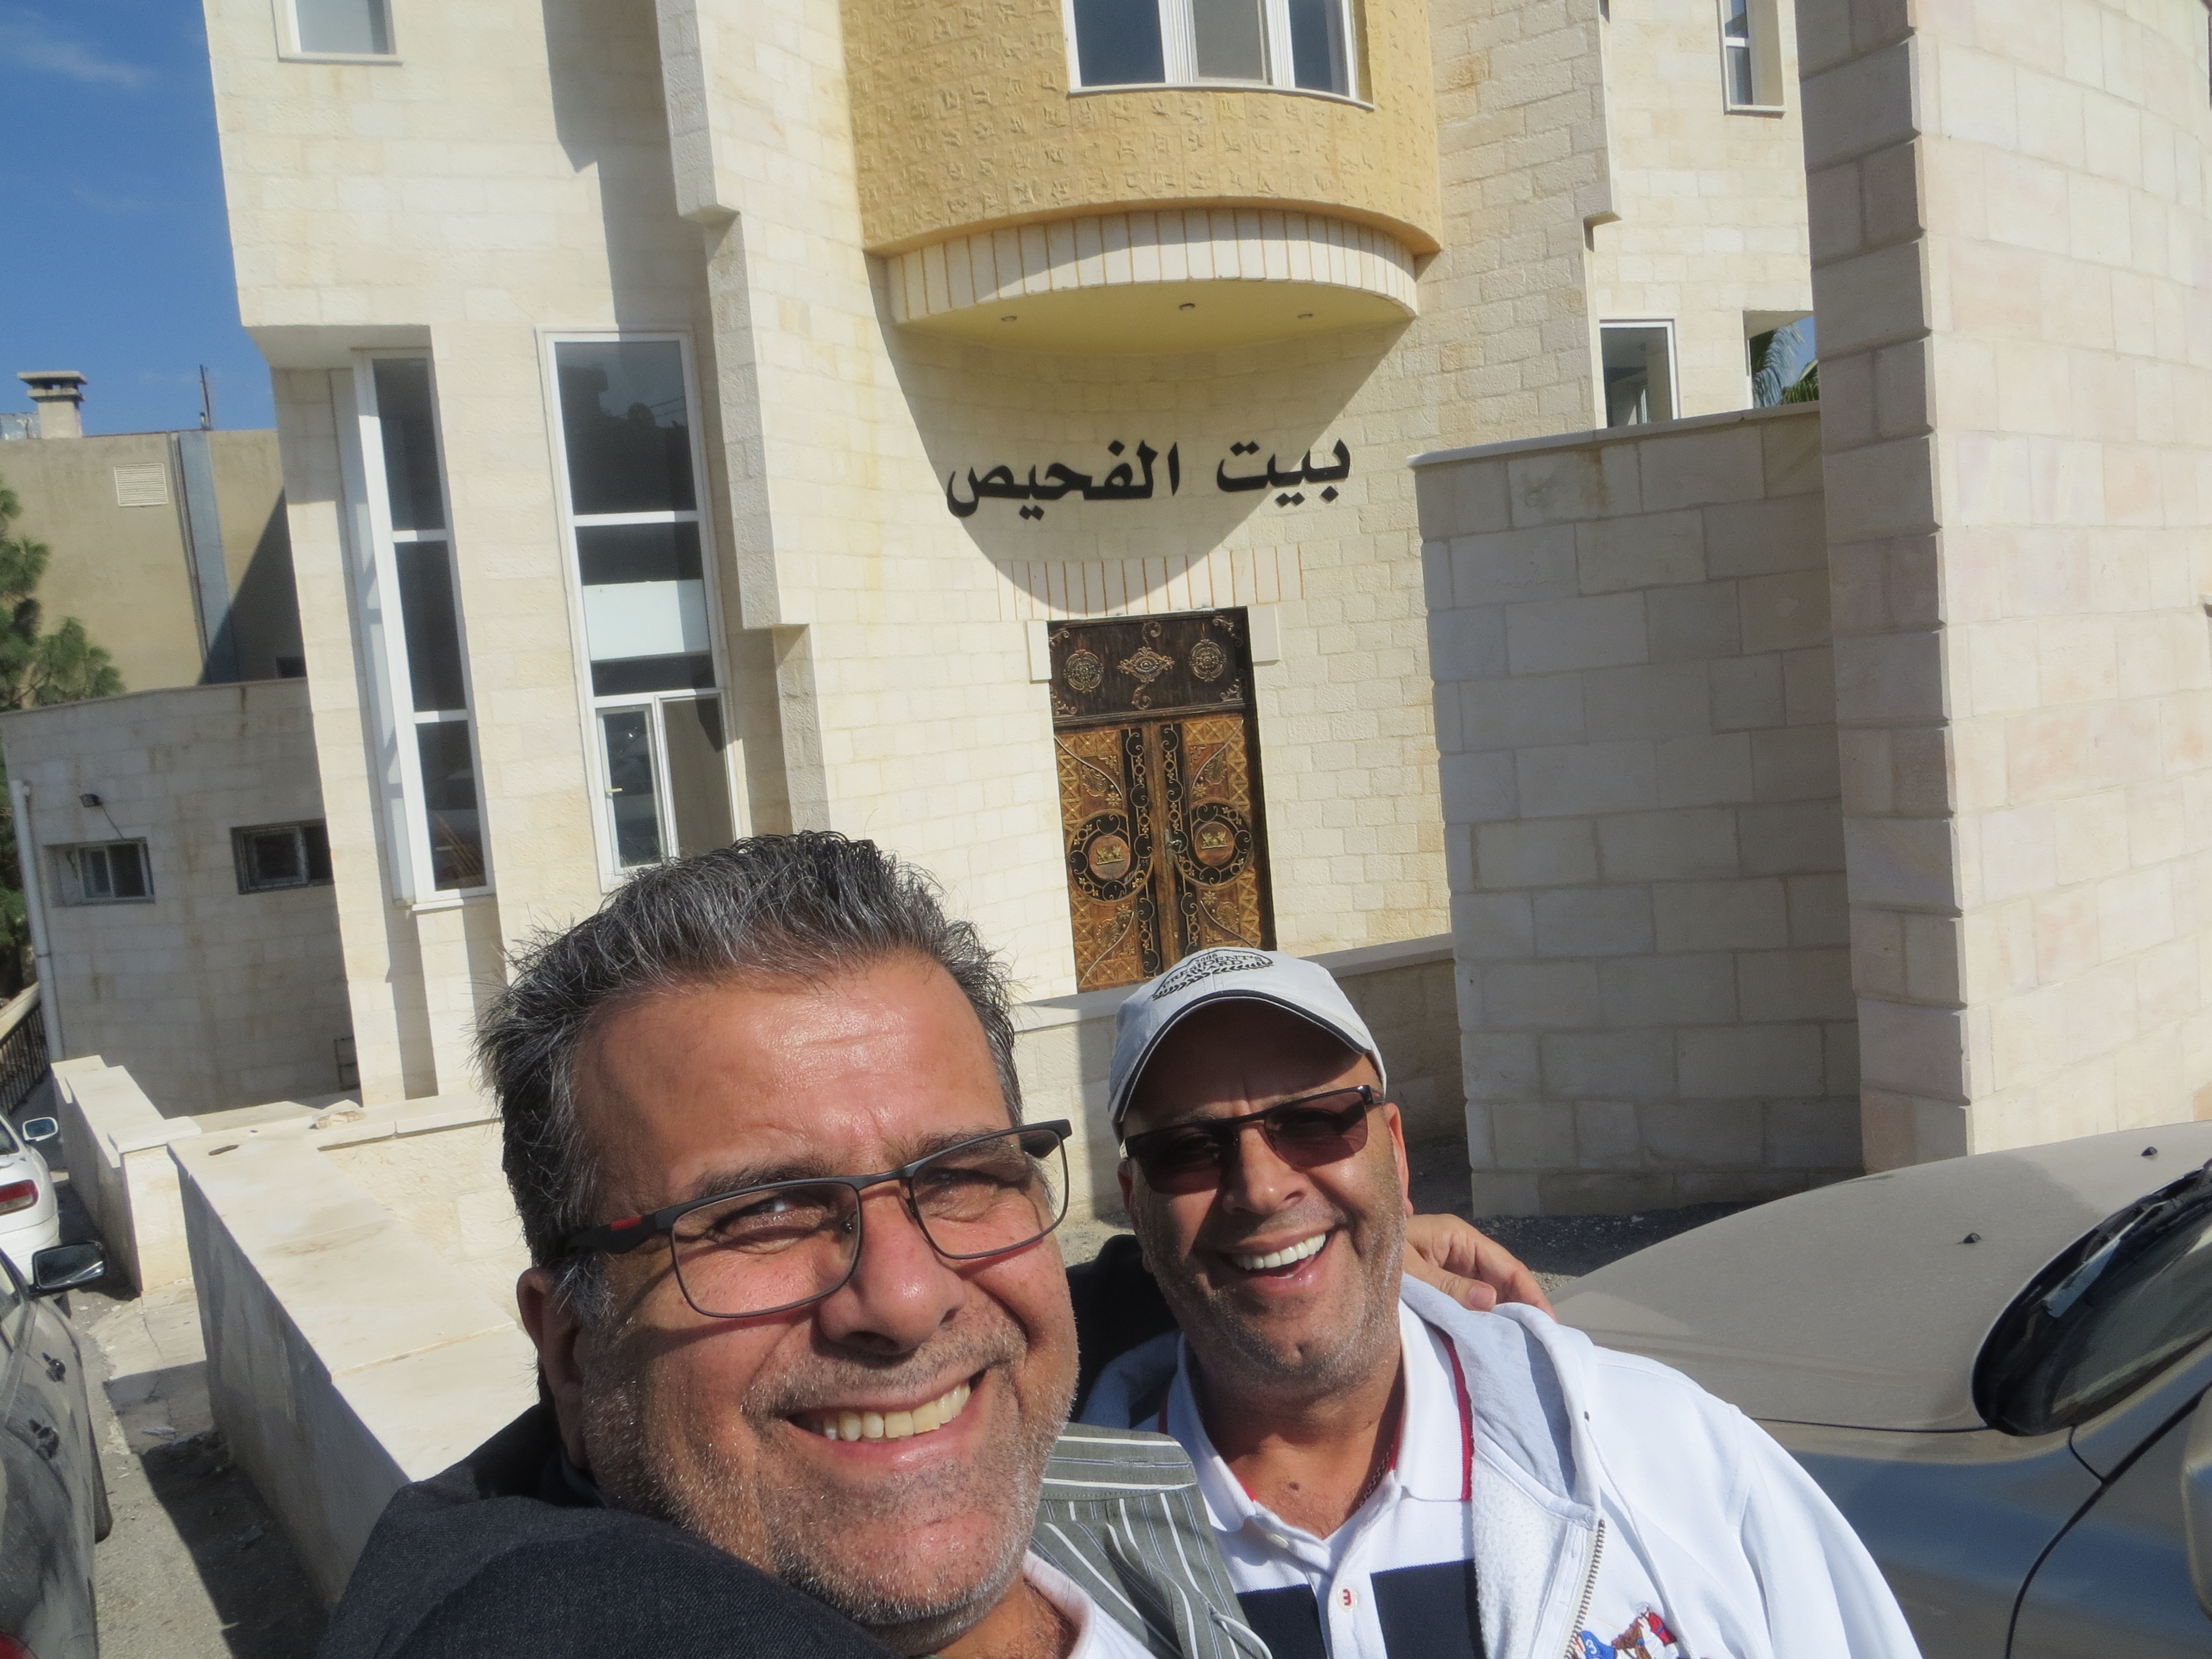 Producer George Nemeh with our key film producer Mr.and Captain Nemo in the a town called Fuhies,Jordan in the Kingdom !